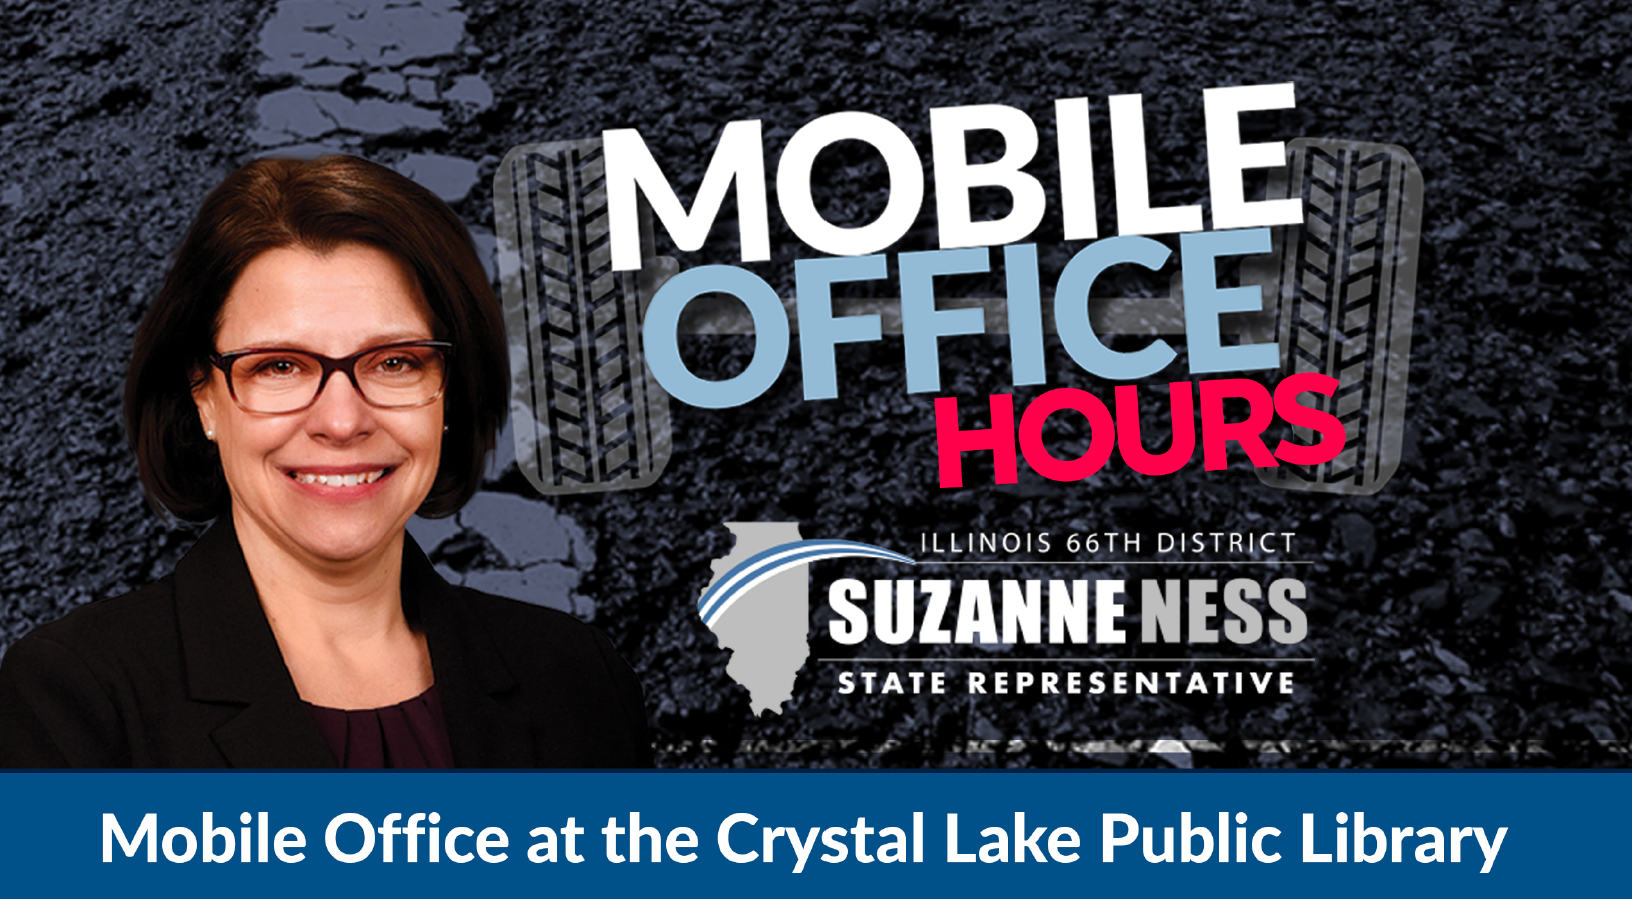 Mobile Office Hours